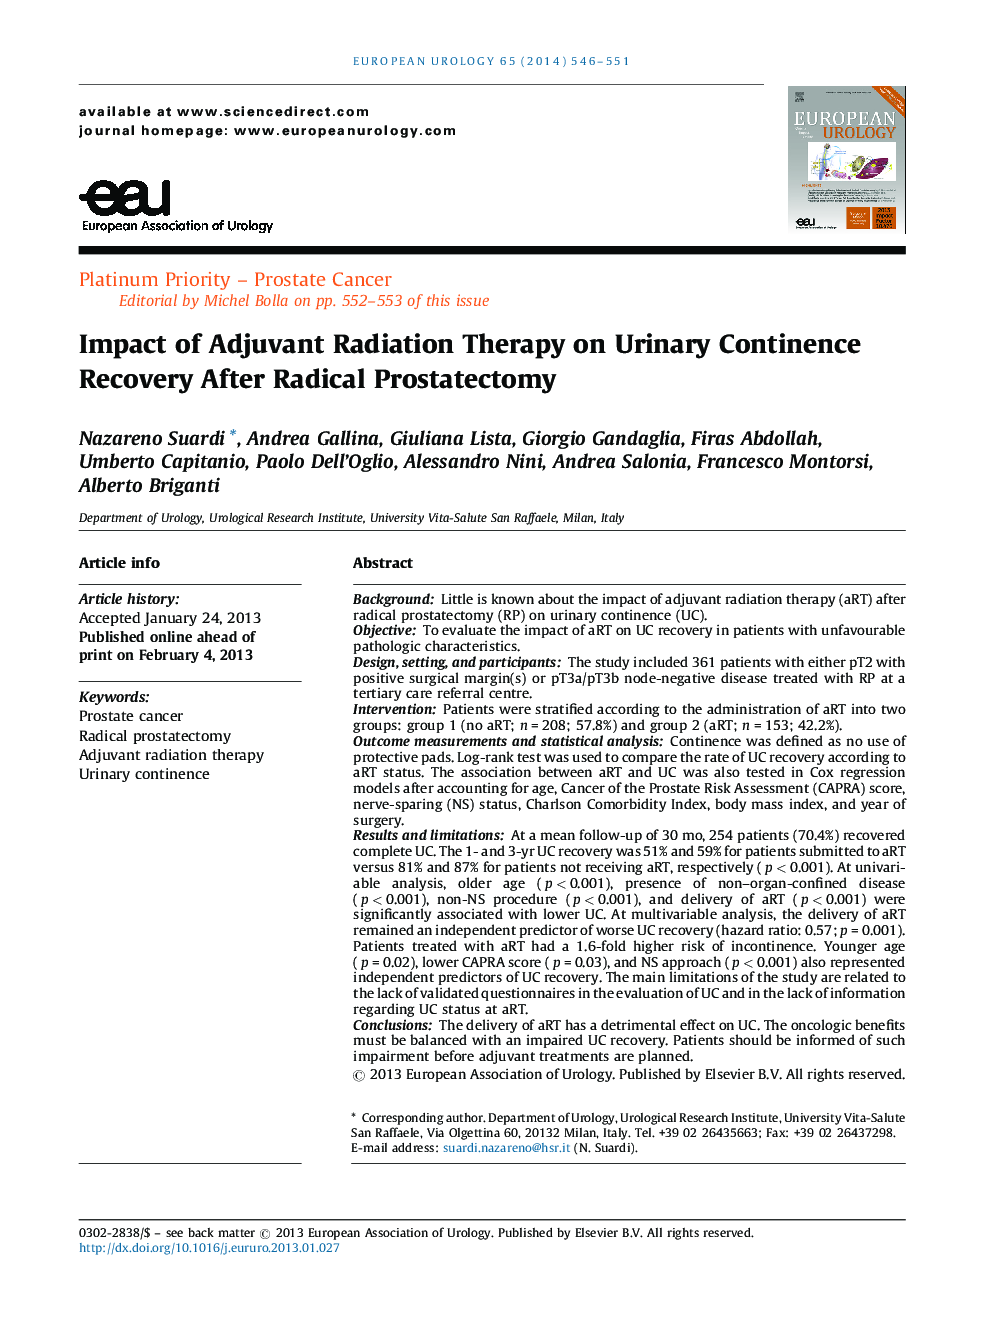 Impact of Adjuvant Radiation Therapy on Urinary Continence Recovery After Radical Prostatectomy